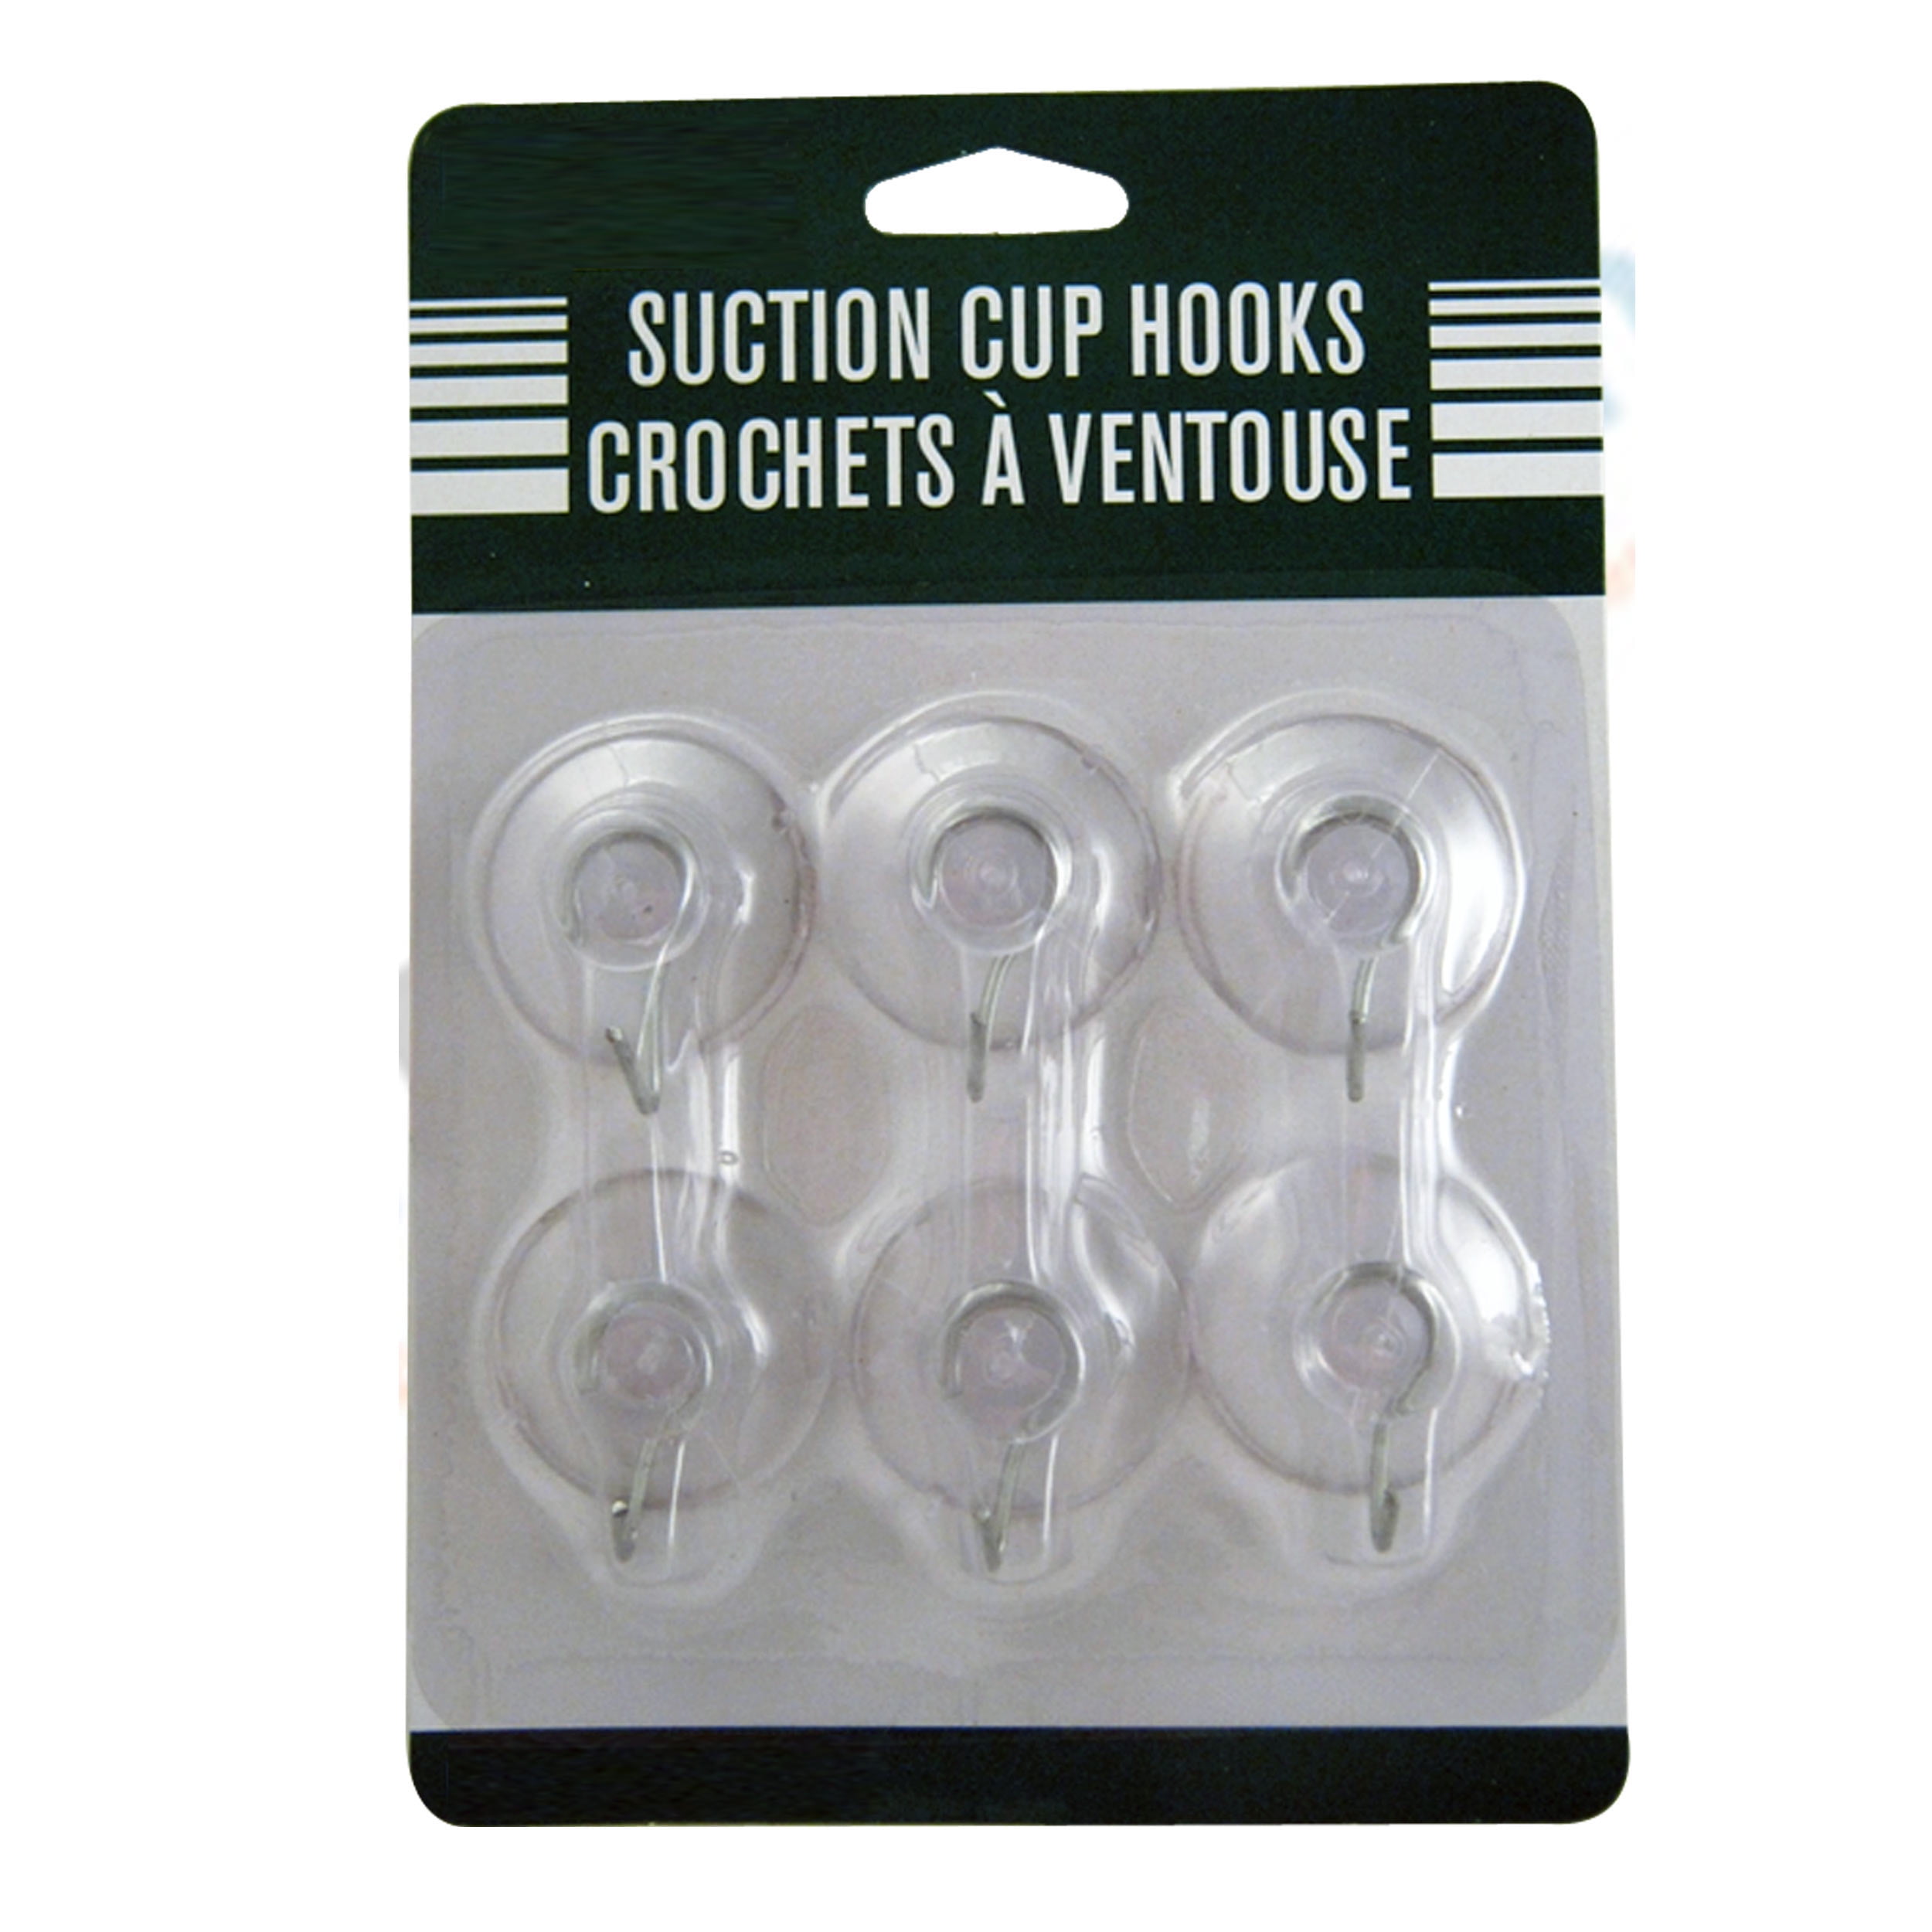 6 Suction Cups Hooks Hanger Plastic Clear Wall Bathroom Kitchen Crafts 1 1/4" D 